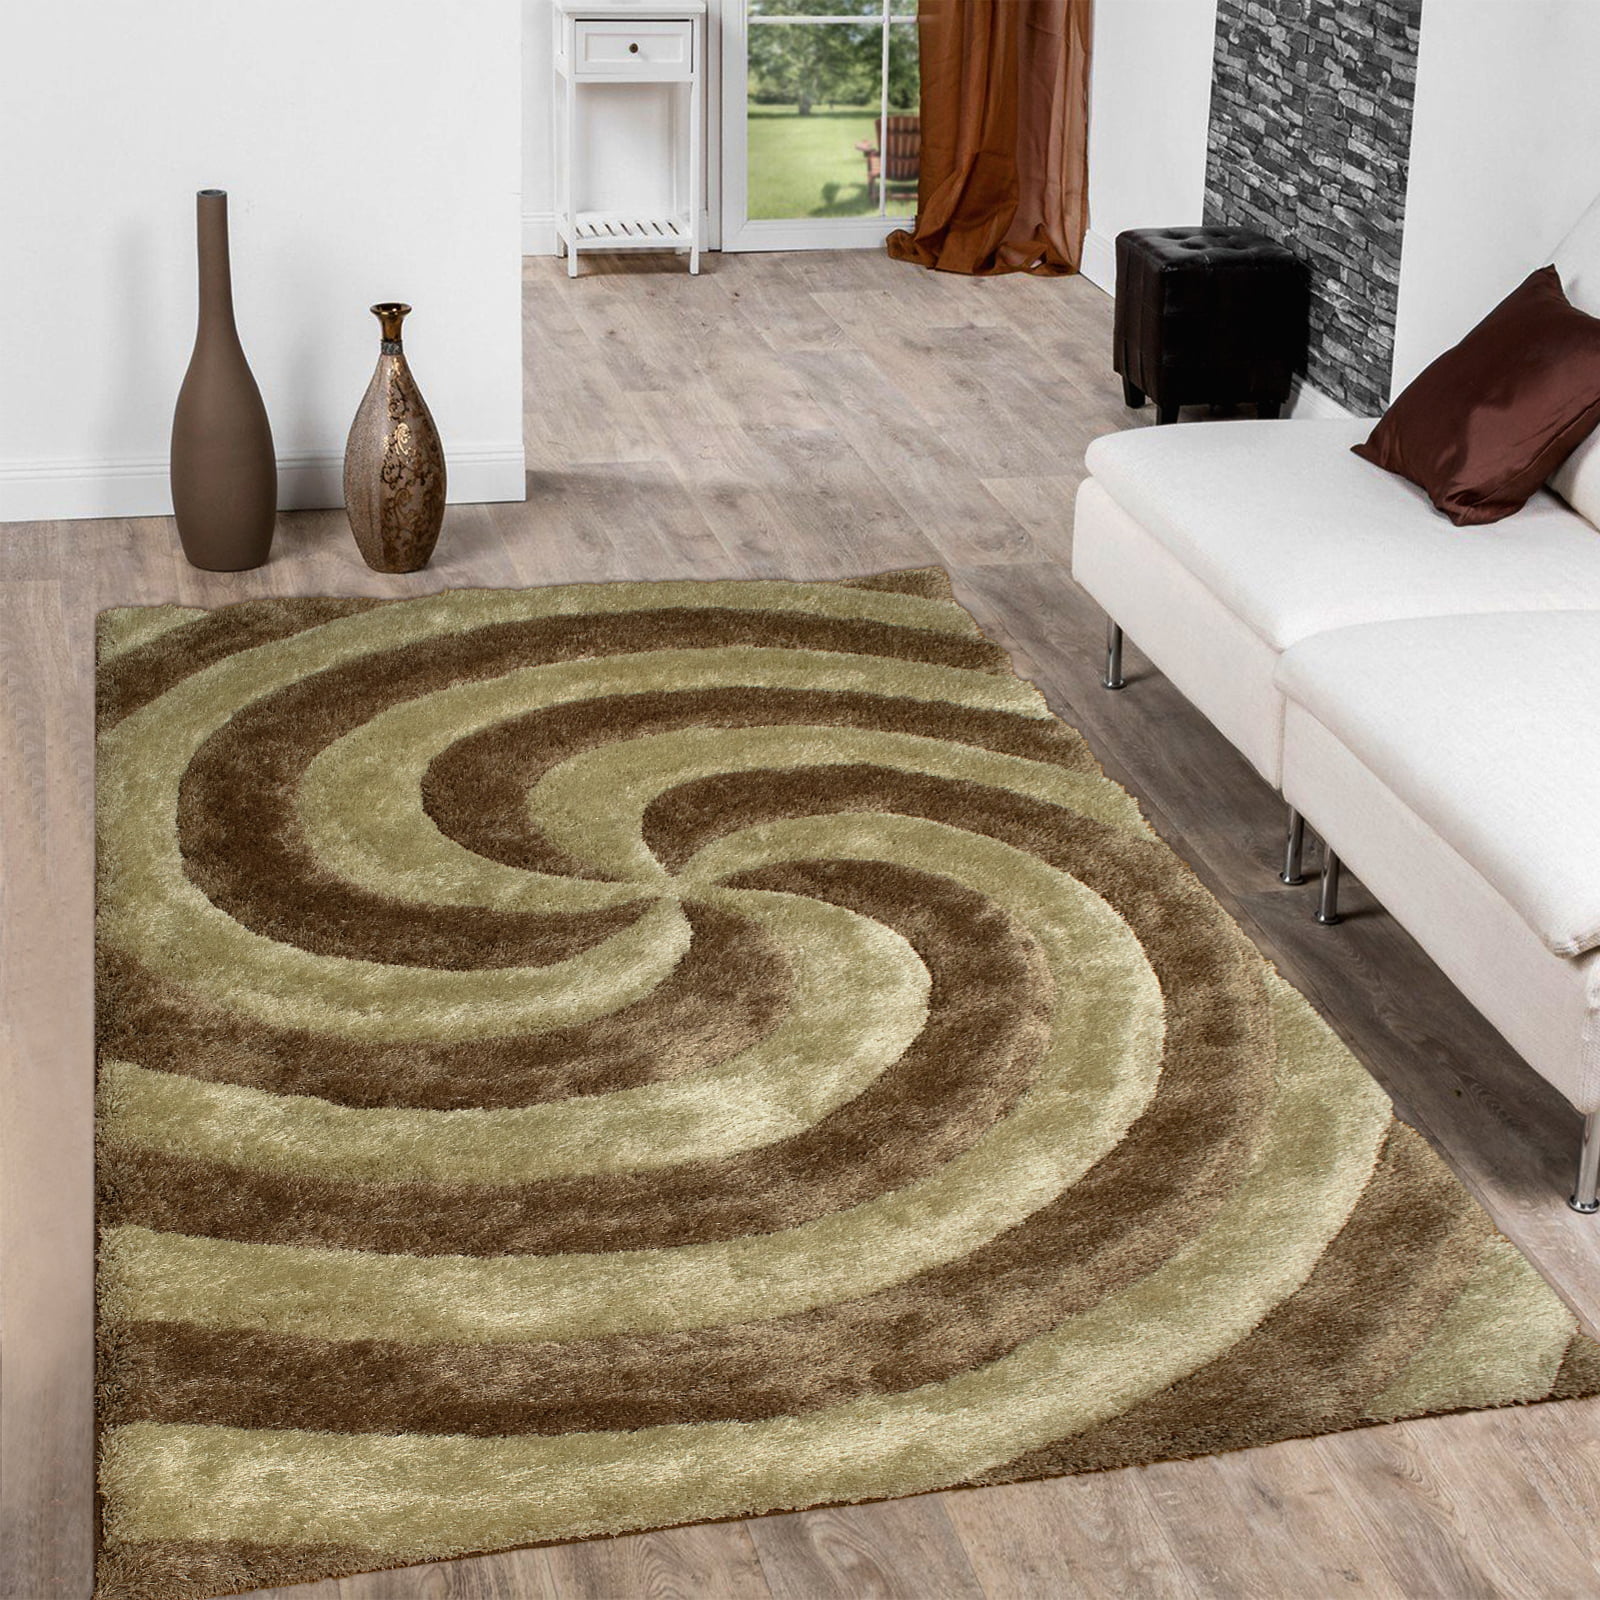 Carpet Brown Beige Short Pile Bright Thin Modern Living Room RugsMany Sizes 